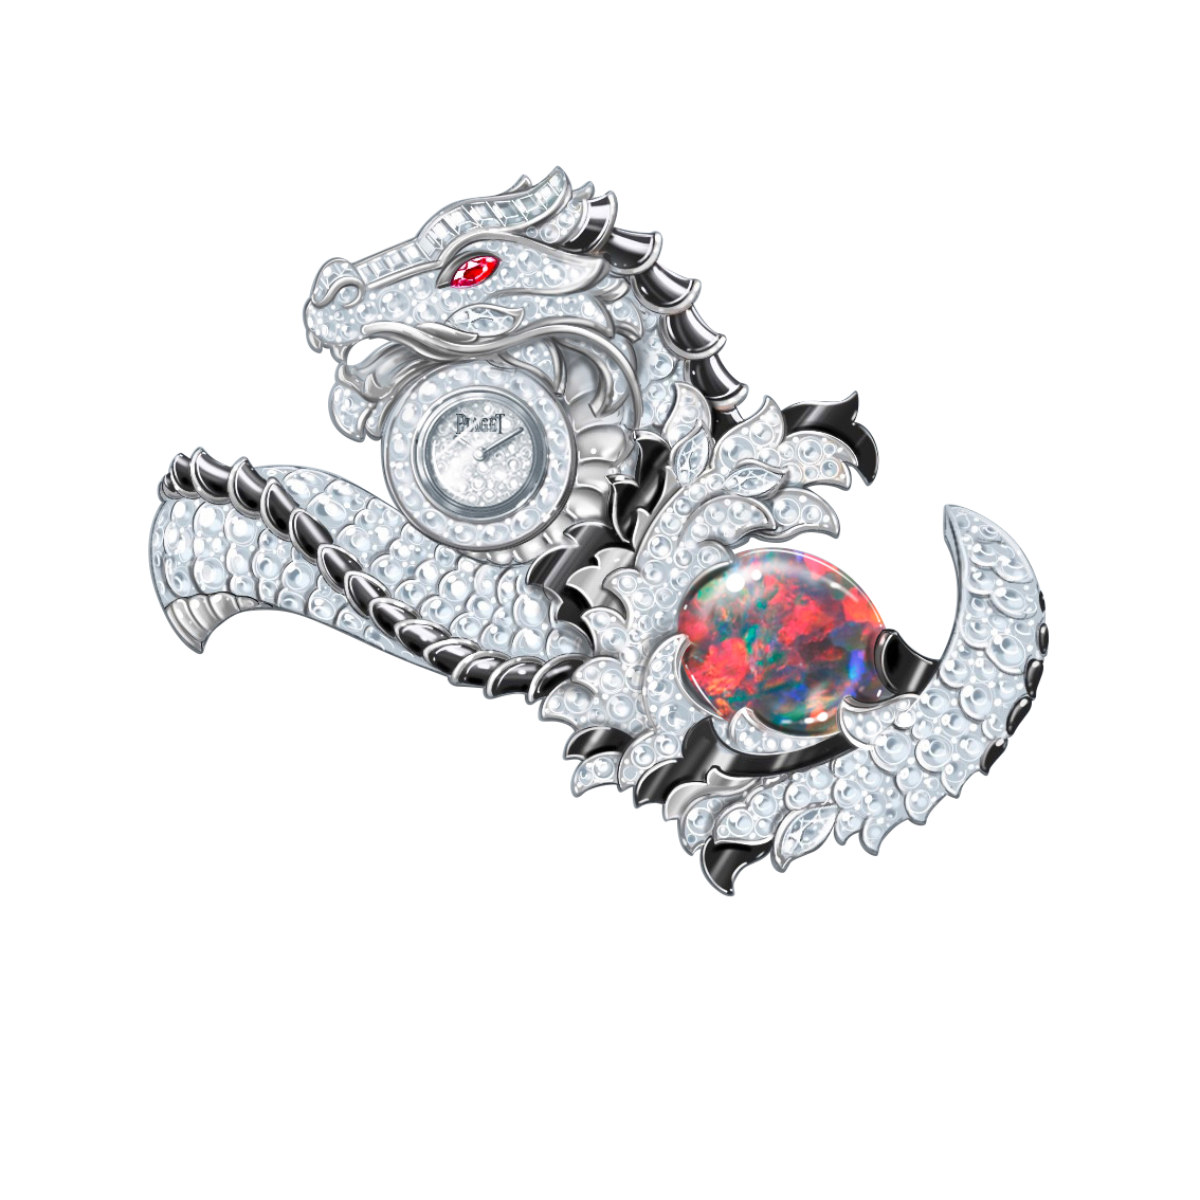 Piaget Introduces A Special Lunar New Year Capsule Collection Dedicated To The Dragon & Phoenix